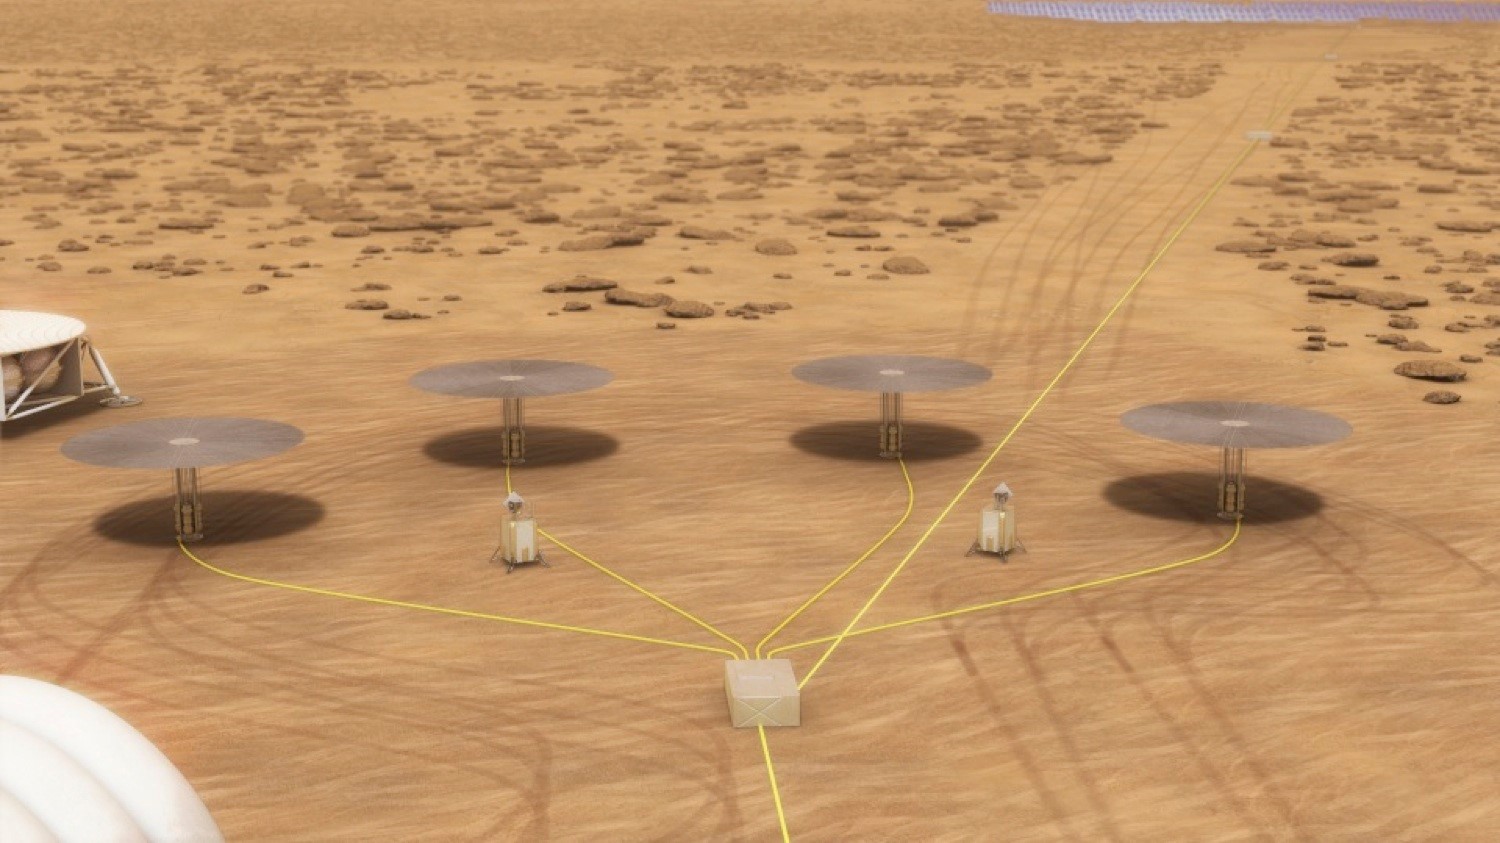 Nuclear reactors the size of wastebaskets could power our Martian settlements